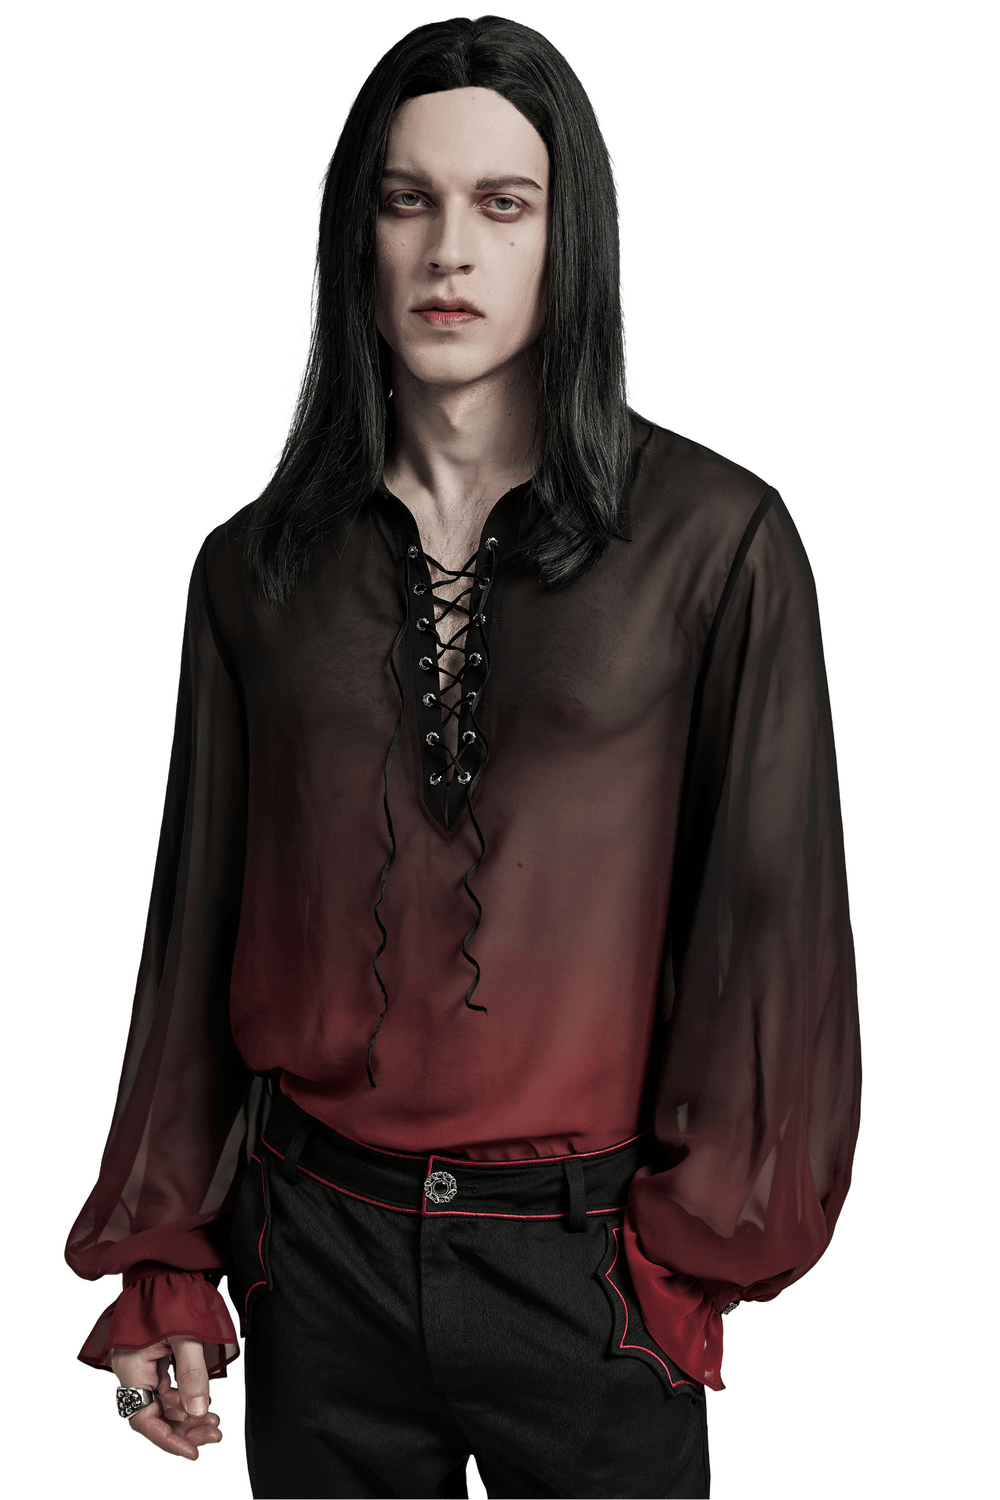 Sheer Chiffon Lace Up Front Gothic Shirt for Men